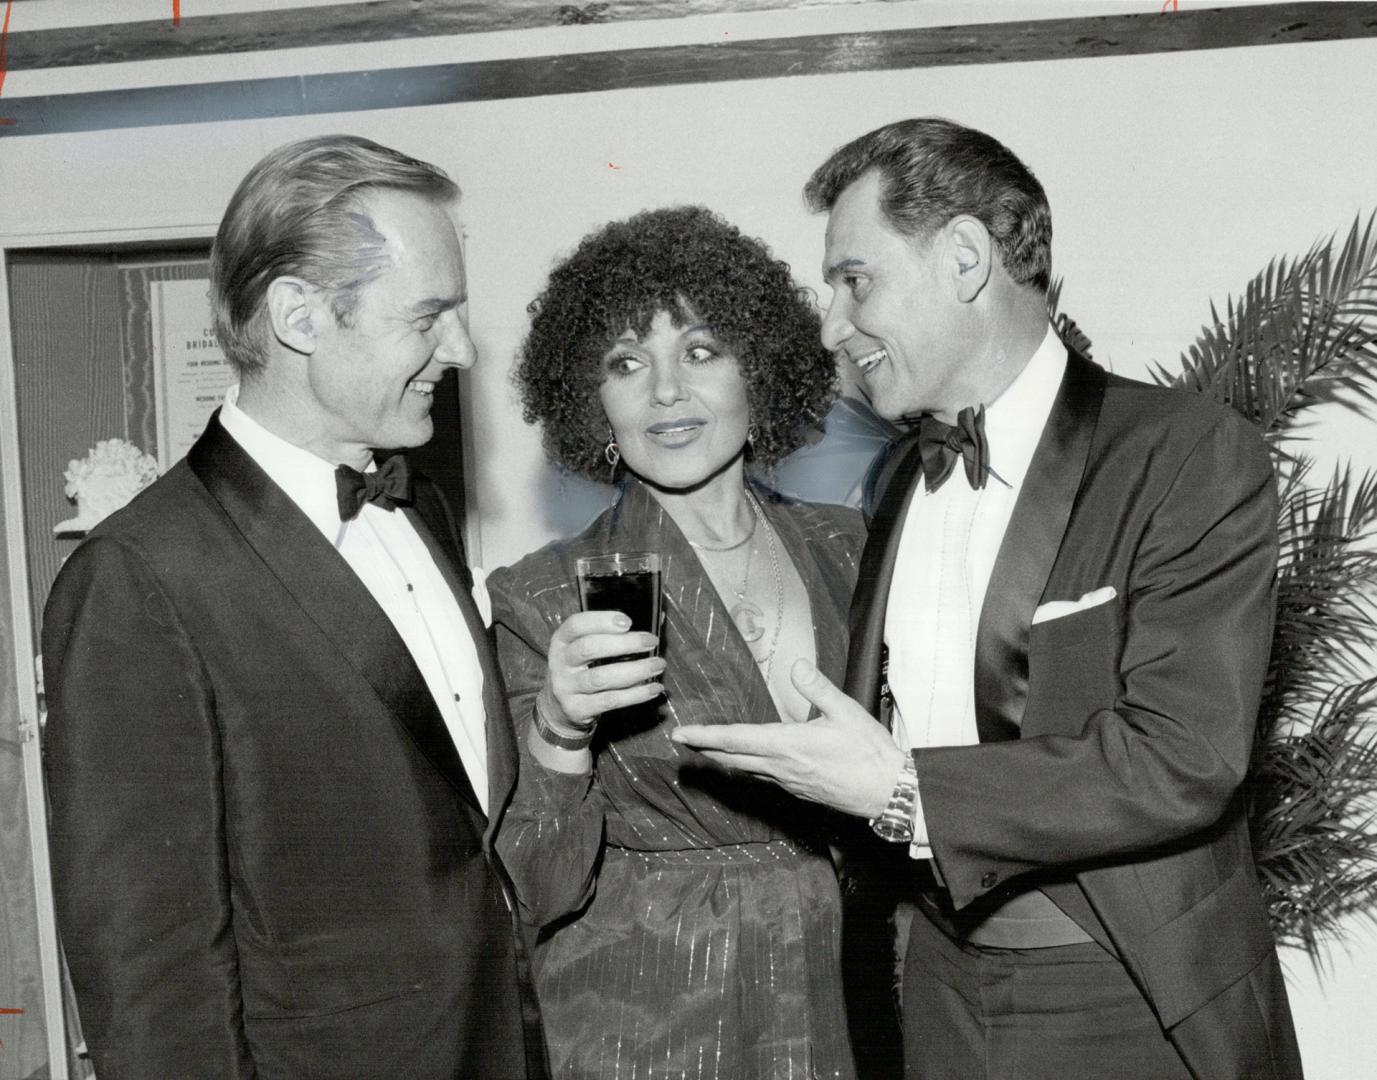 Top trio: Singer Cleo Laine chats with Alan Marchment (left) president of the Toronto Symphony board of directors, and Lorne Lodge, IBM Canada, at Arcadian Court dinner dance